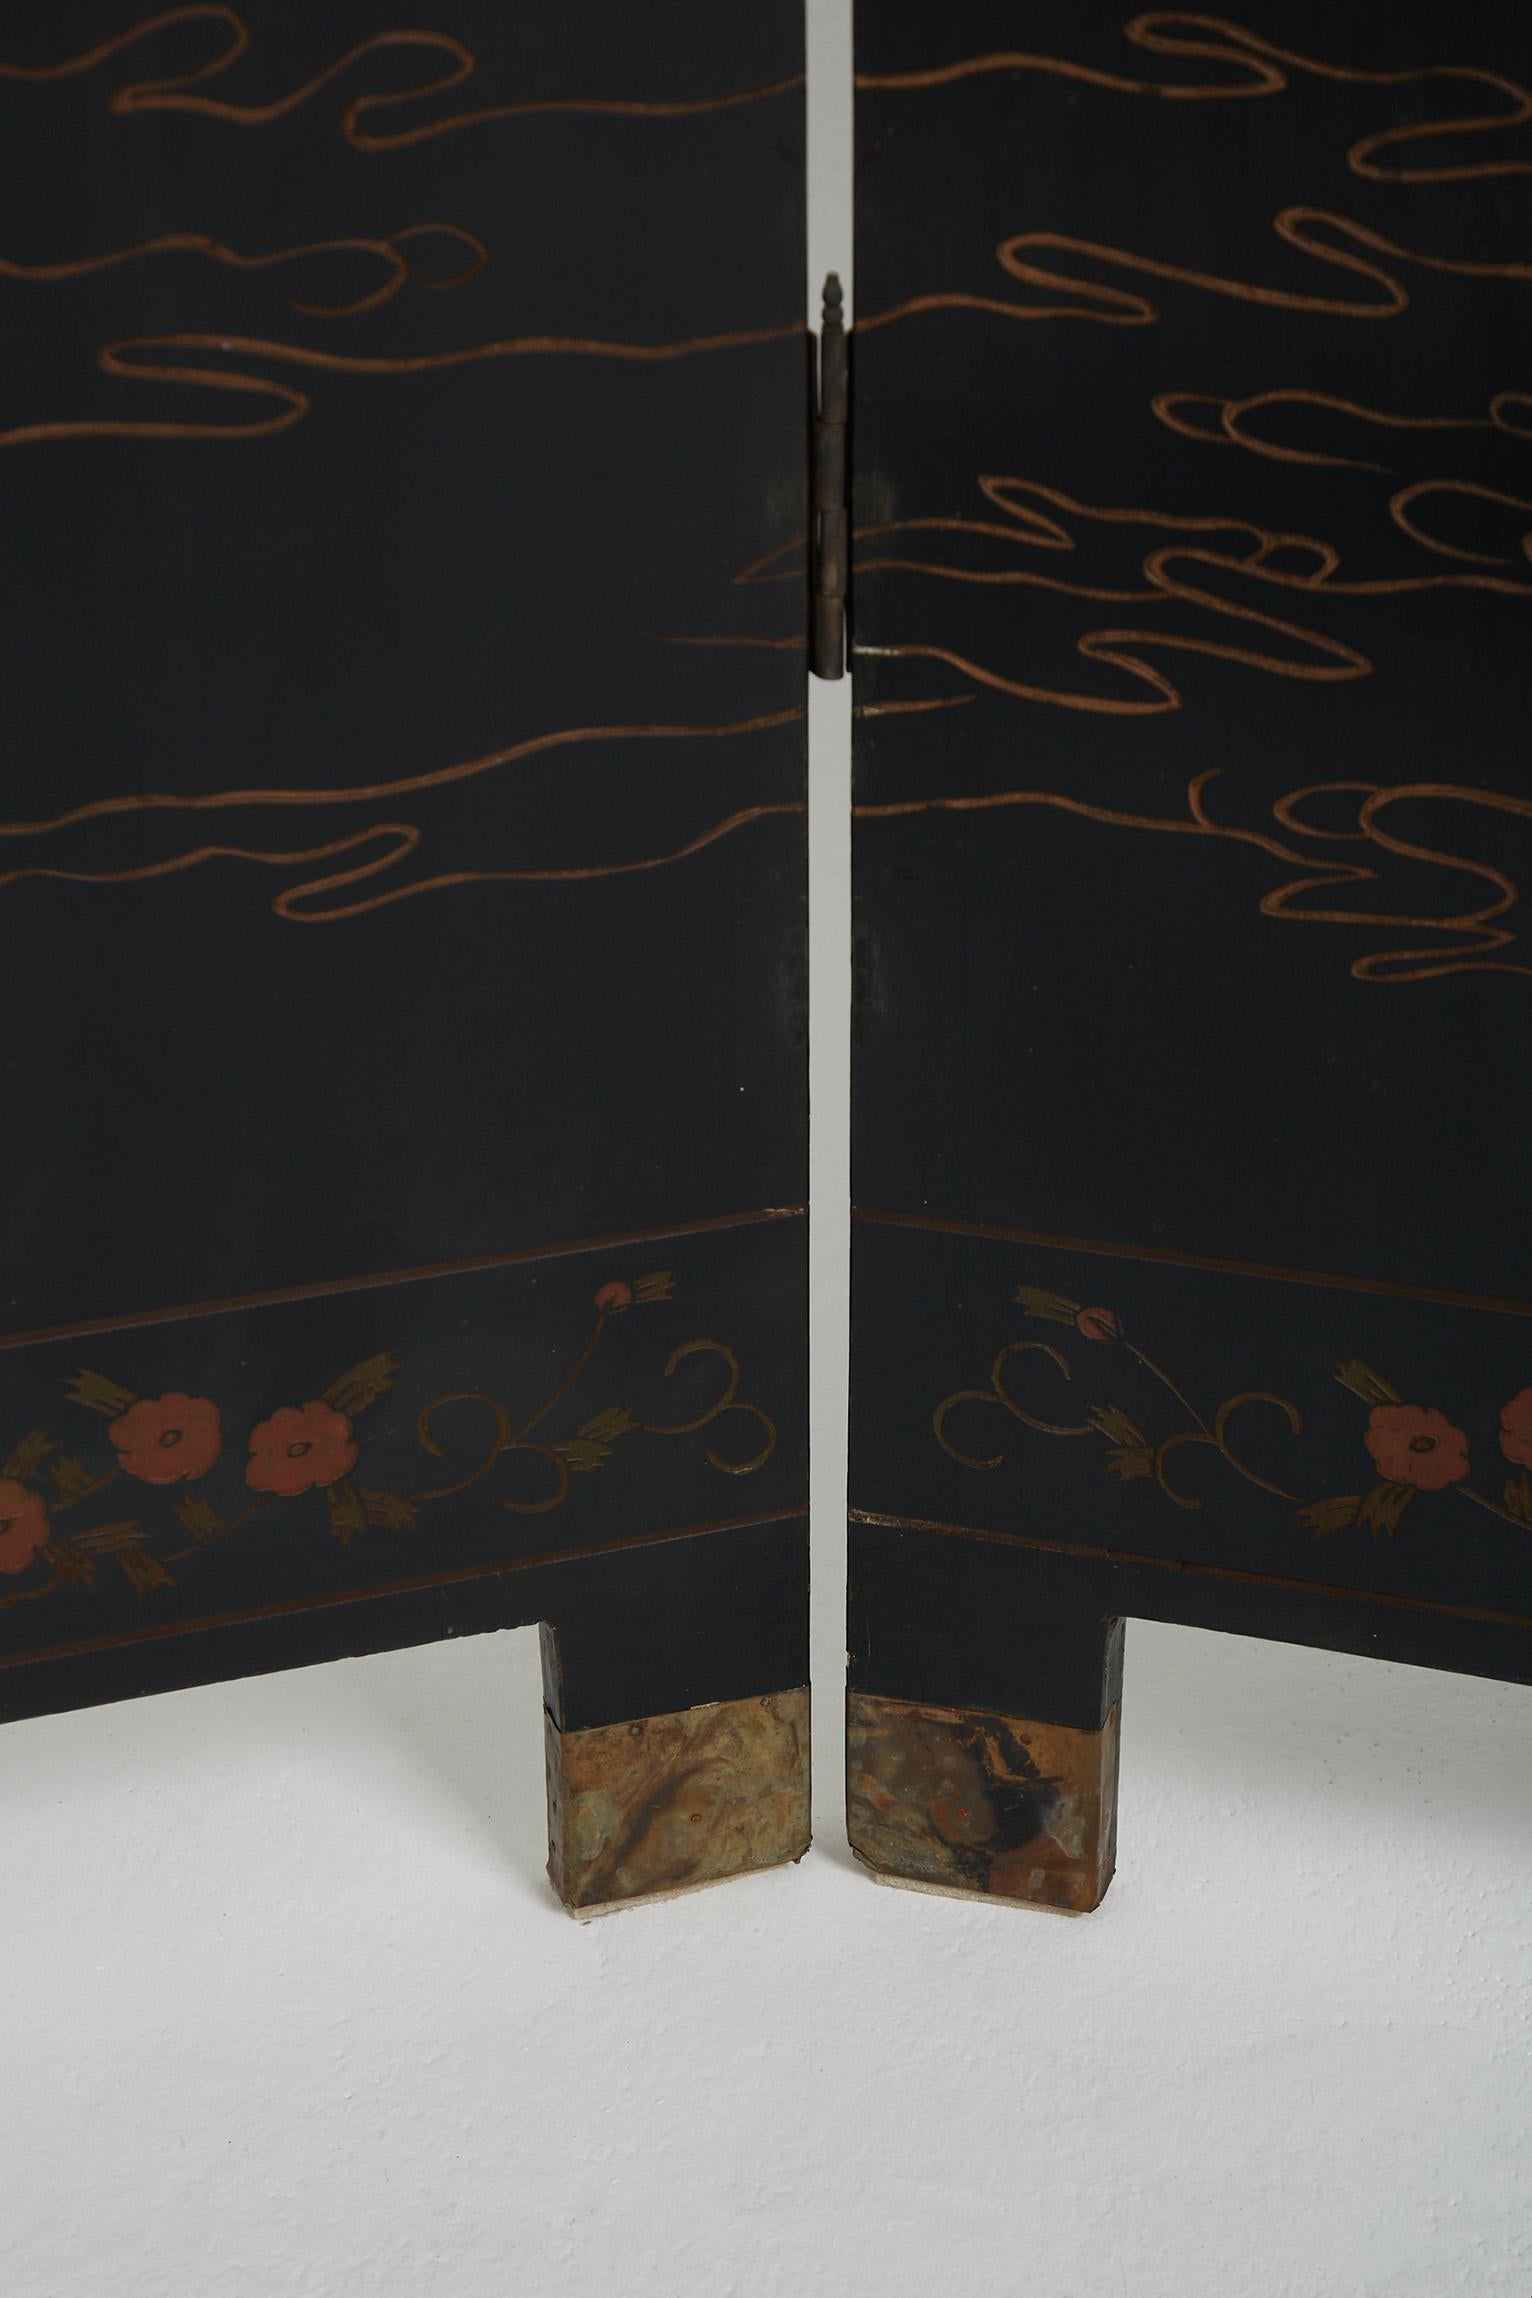 Coromandel Lacquer 6 Leaf Chinese Screen 4